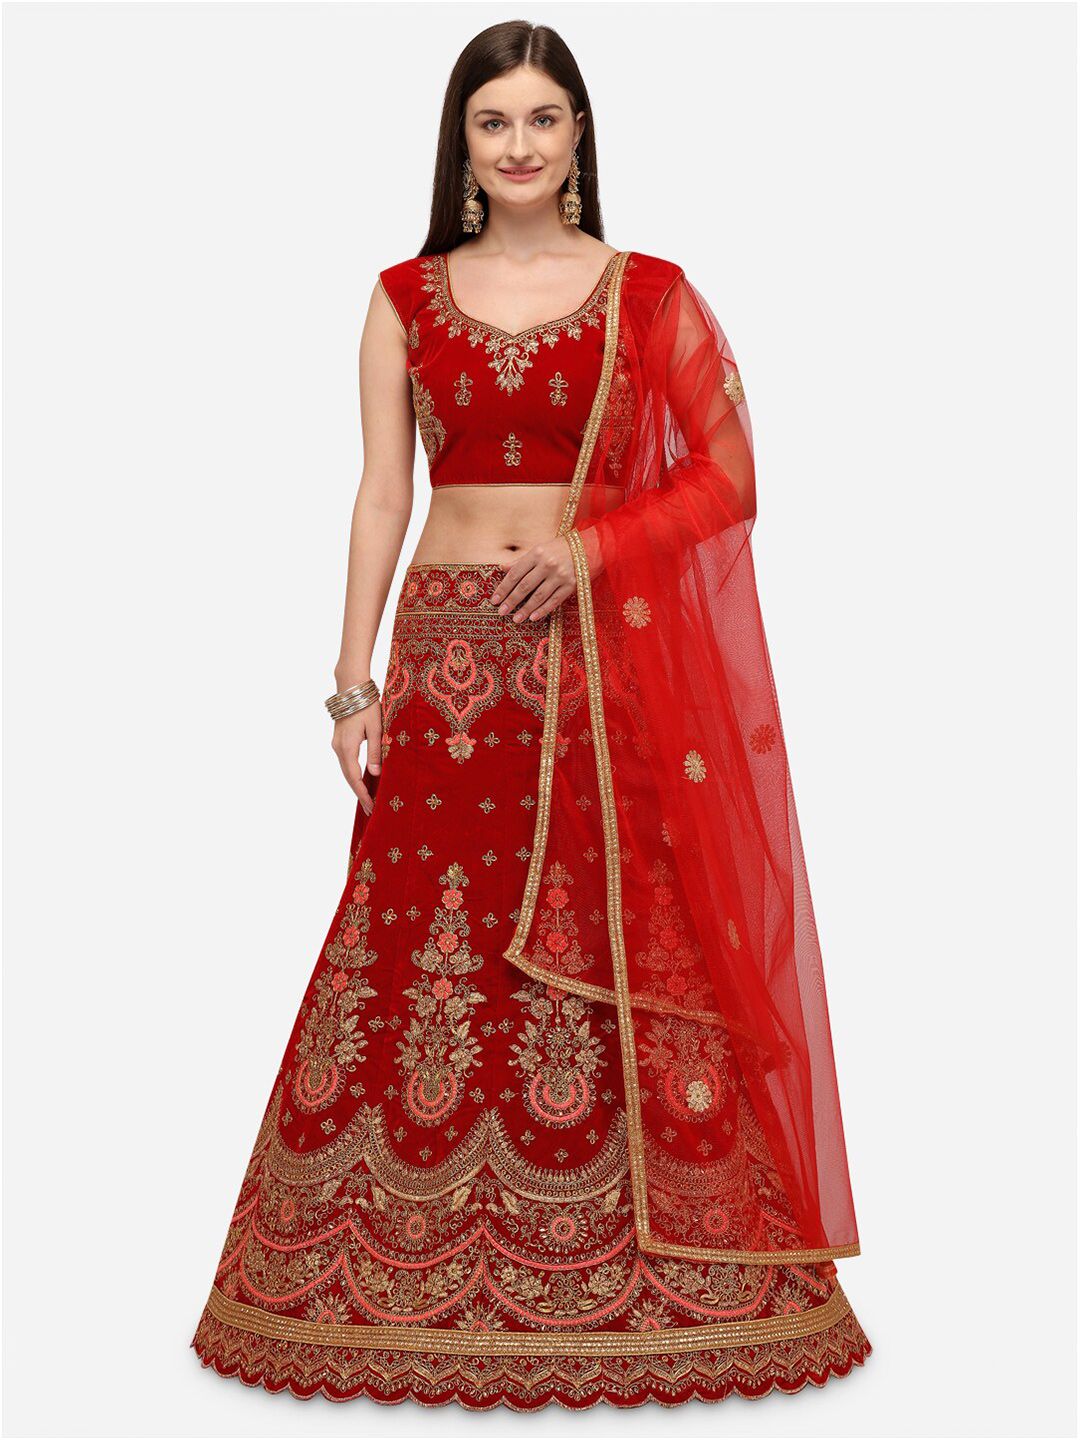 Rajesh Silk Mills Red & Gold-Toned Embroidered Semi-Stitched Lehenga Set Price in India